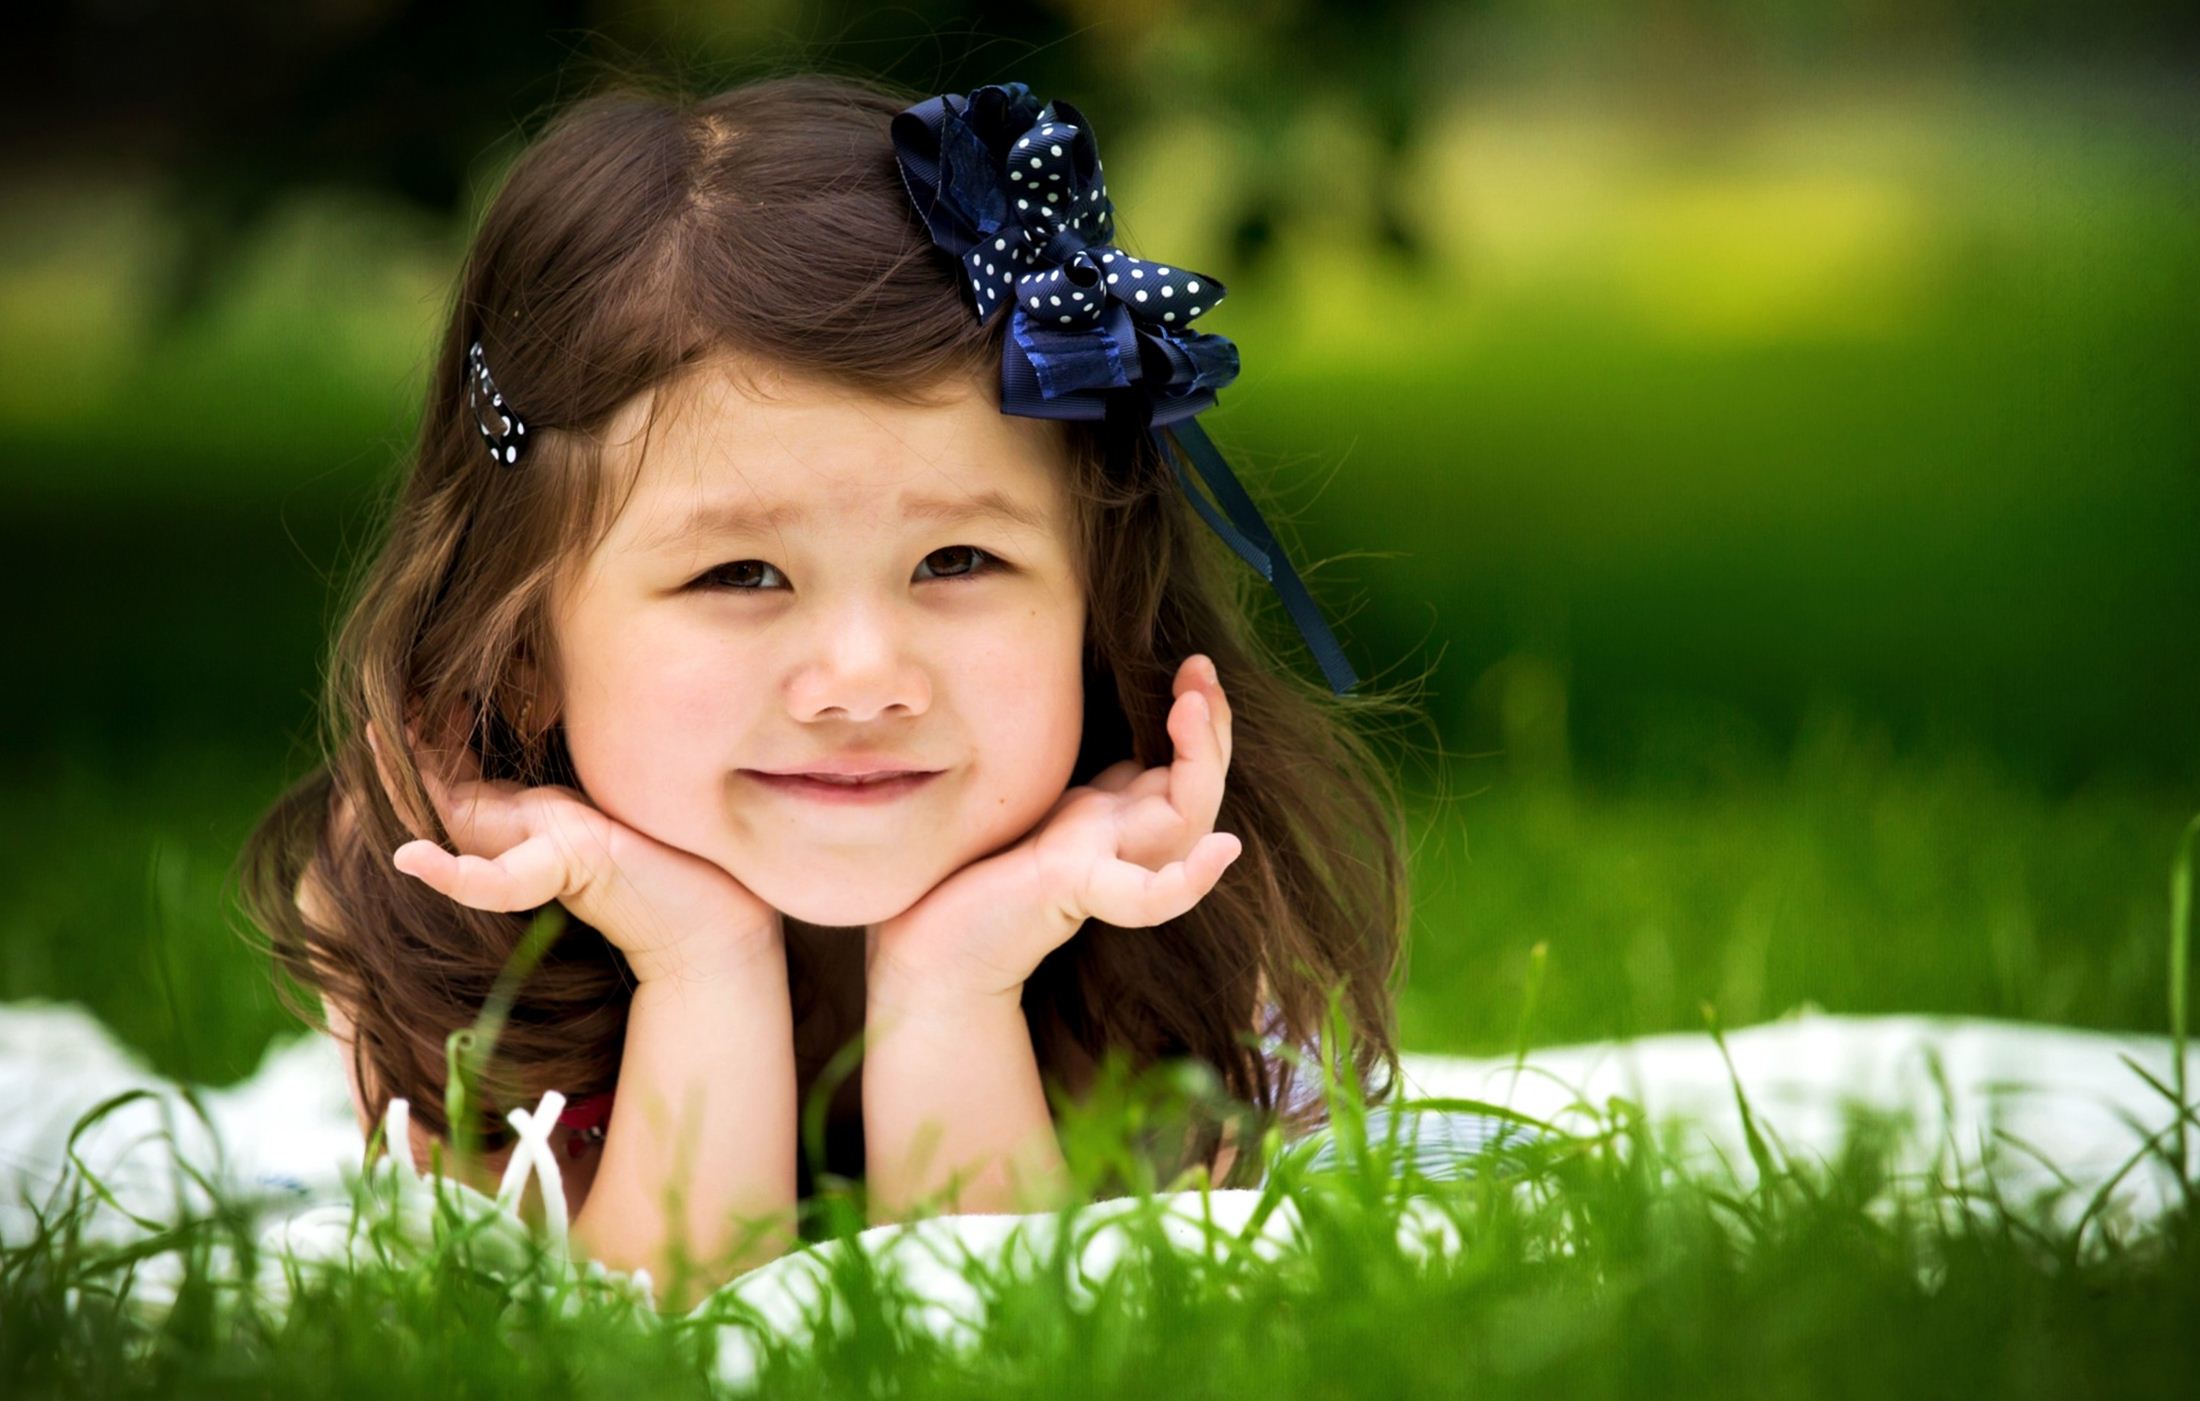 Smiling Child Girl Wallpaper Full HD Pictures 2200x1401